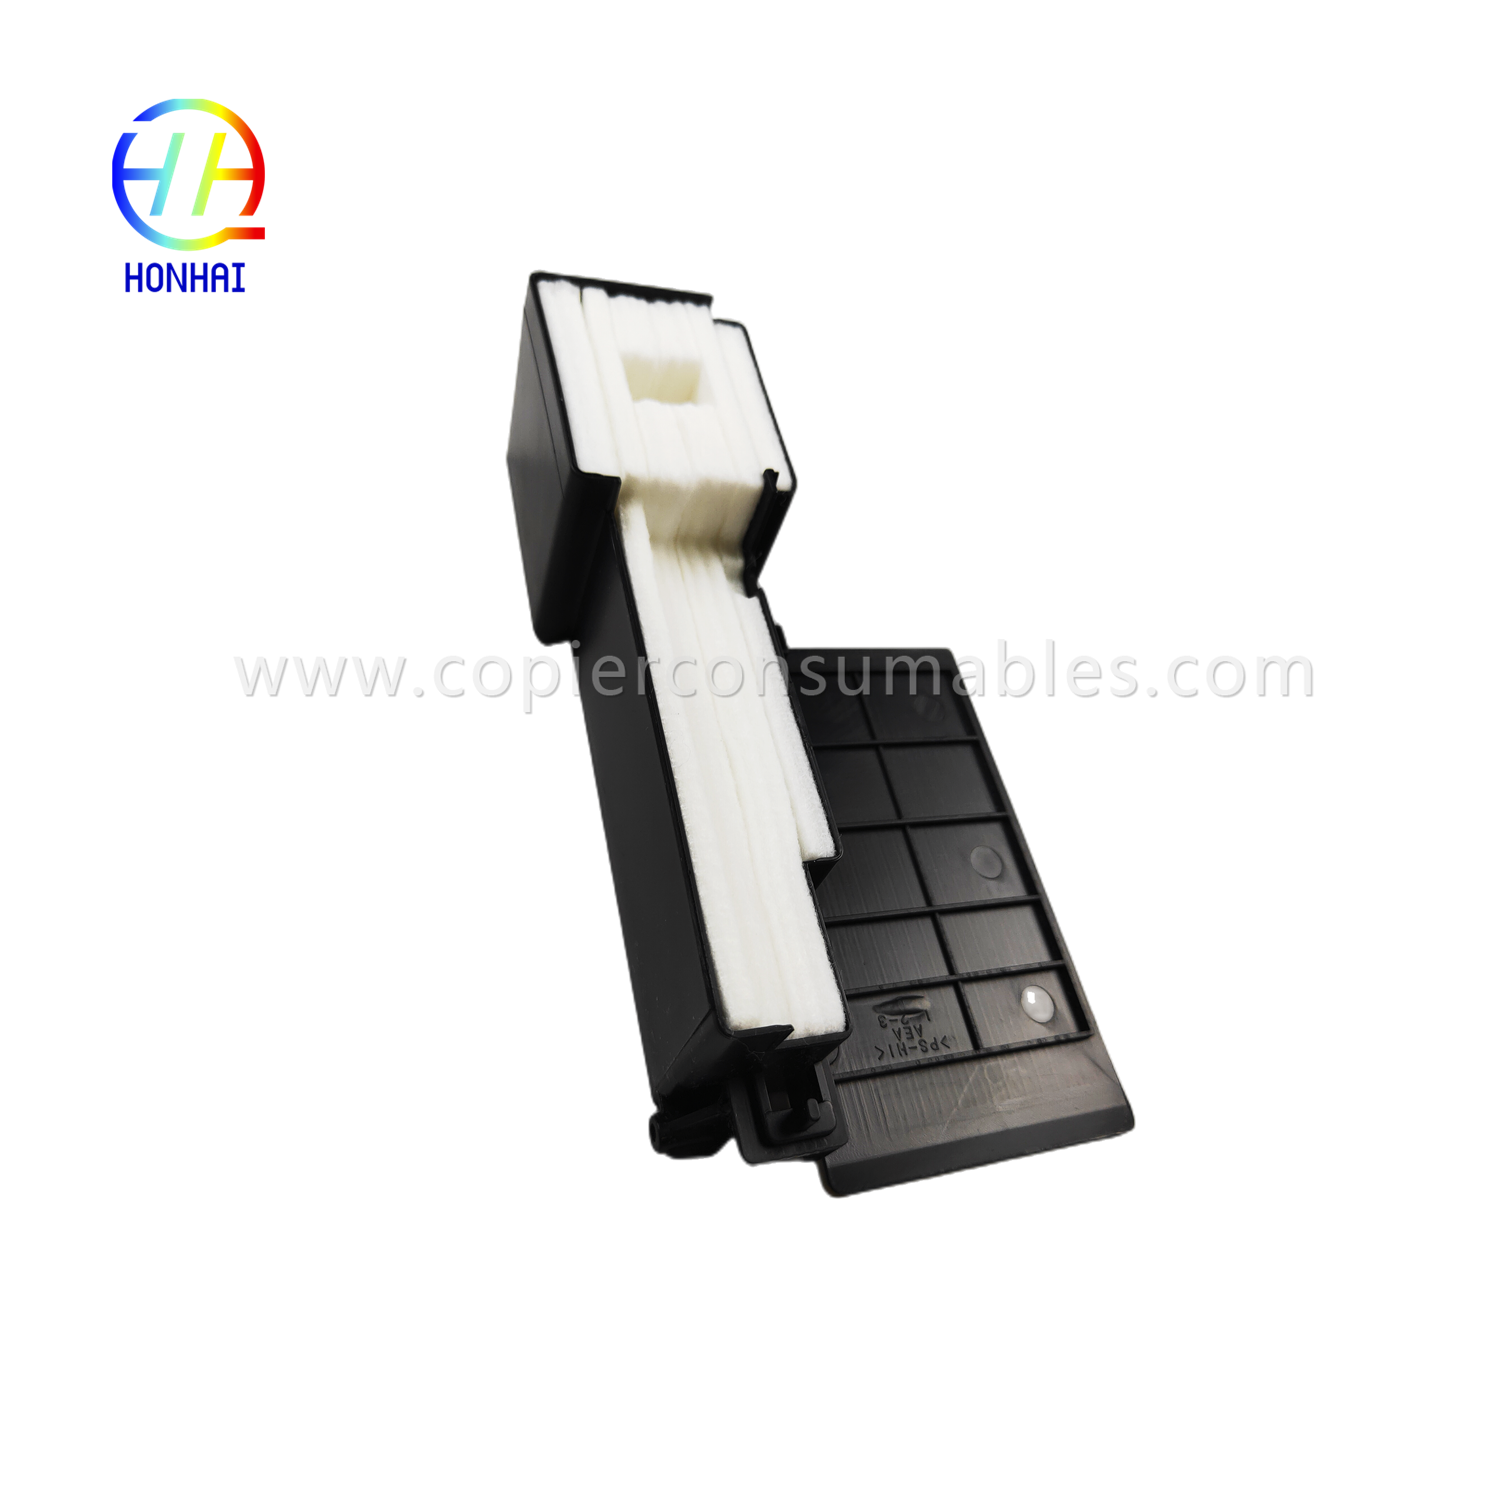 https://c585.goodao.net/waste-ink-pad-pack-forl220-l360-l380-printer-product/